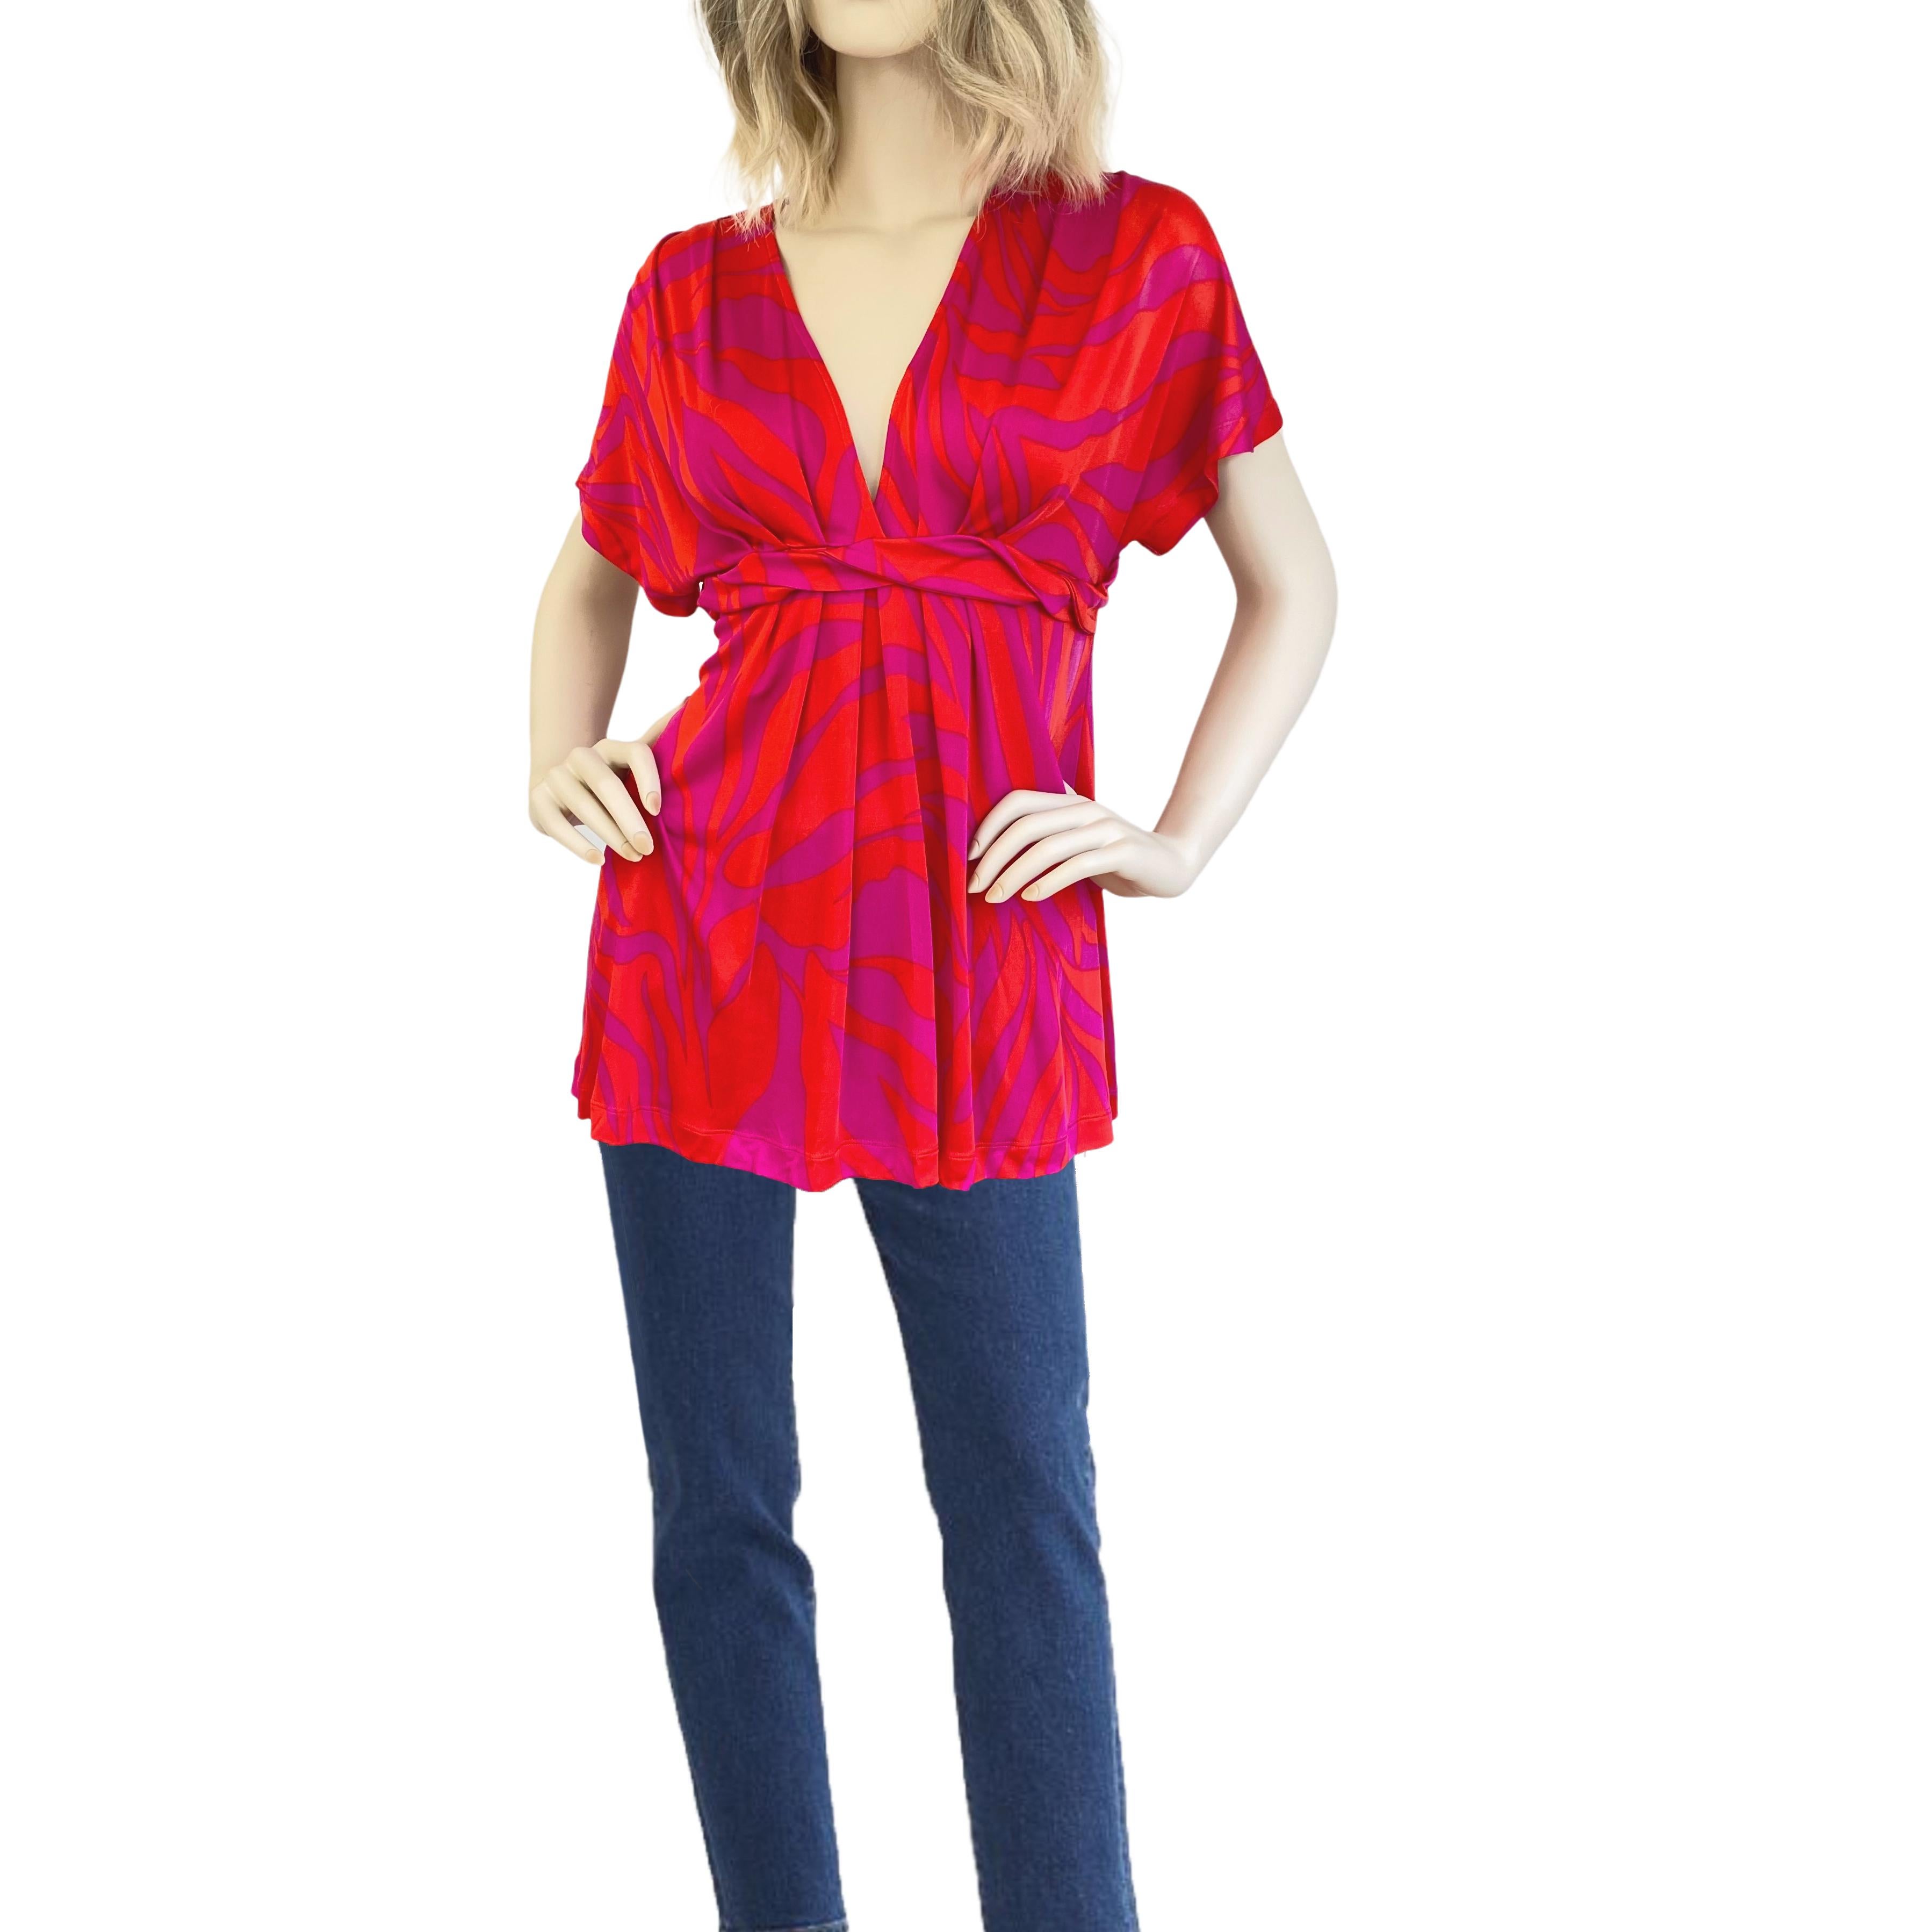 Easy cool vibrant top that goes with everything.
From 'flower by Flora Kung' collection - all are in all-natural 70% silk, 30% viscose unless otherwise stated.
Viscose is similar to rayon: made from plants.
Approximately 28